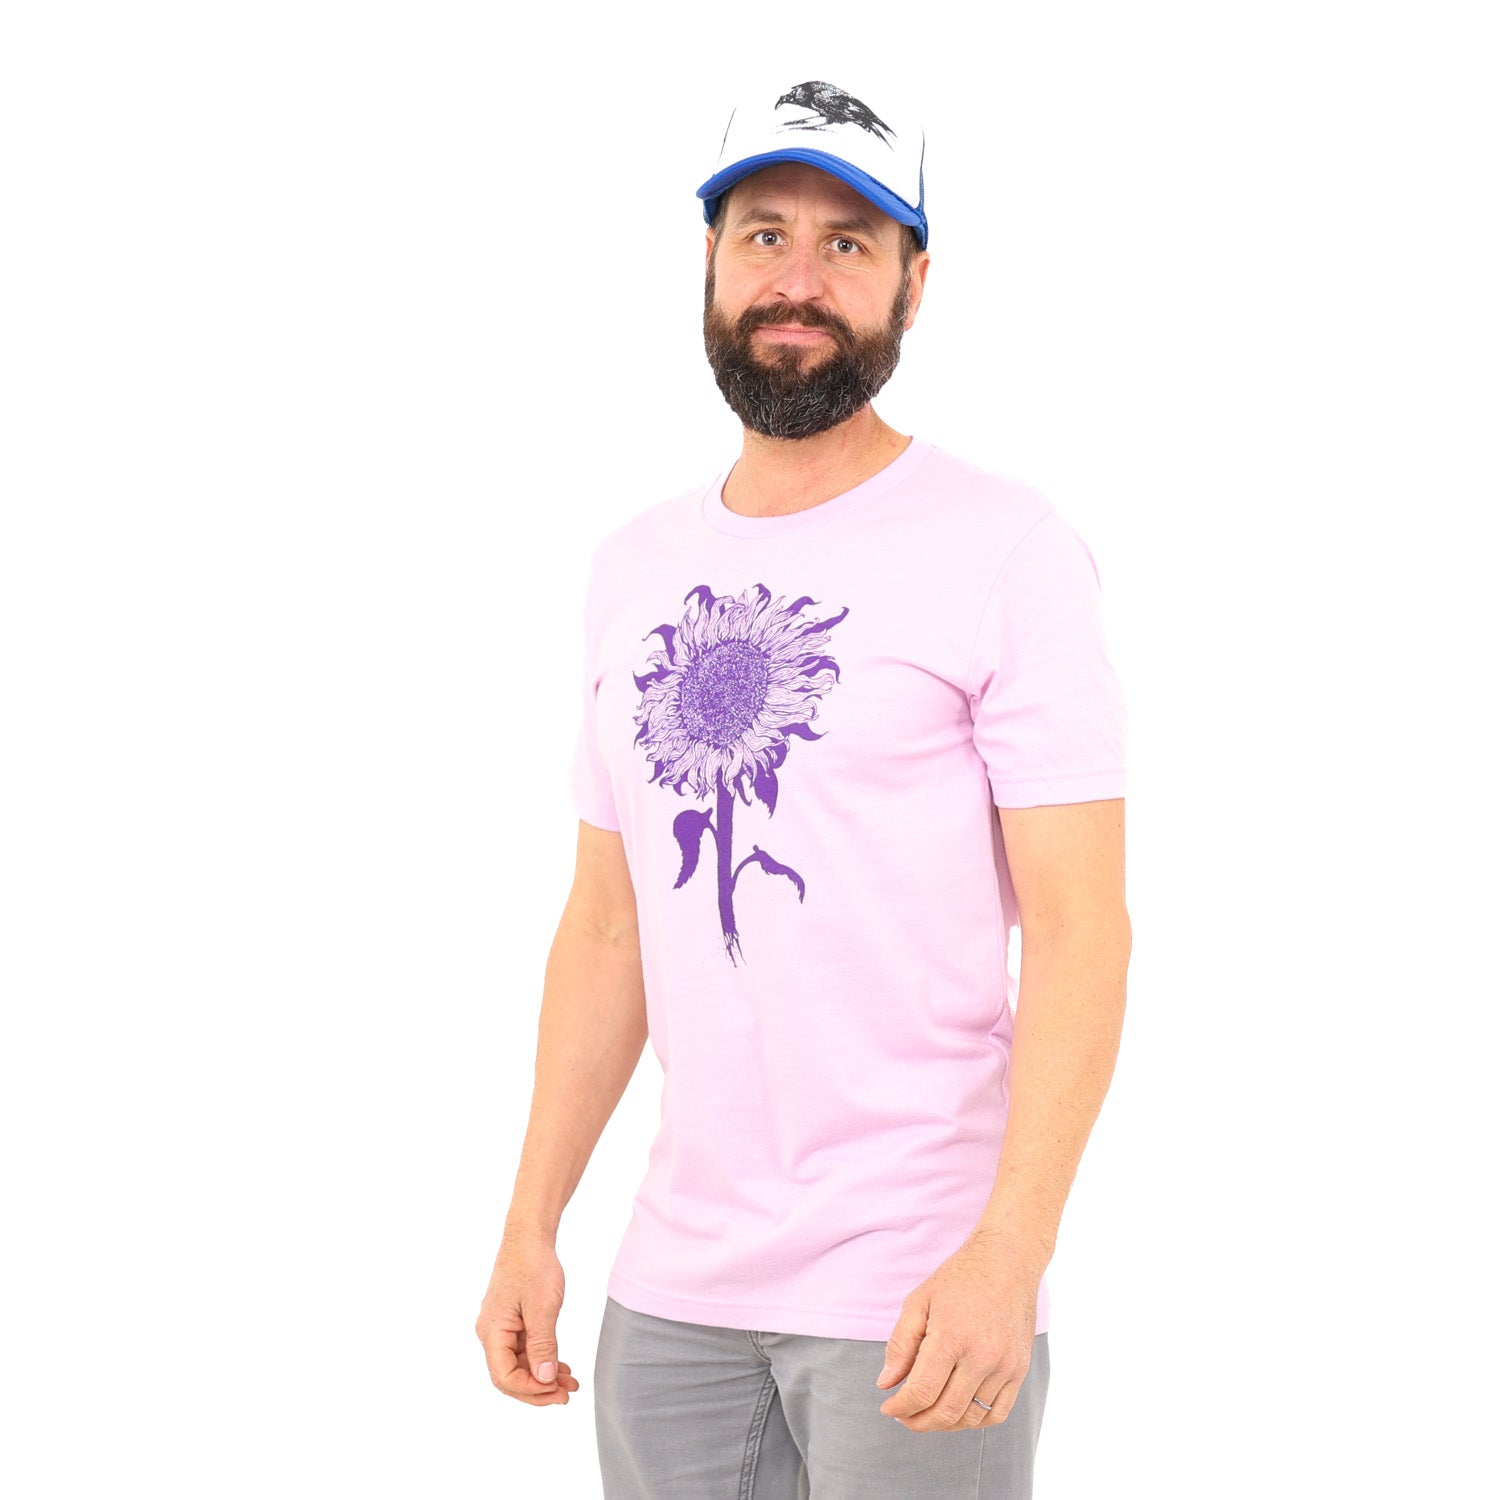 man standing in white background while a pinkish/purple t-shirt with dark purple ink of an intricate sunflower